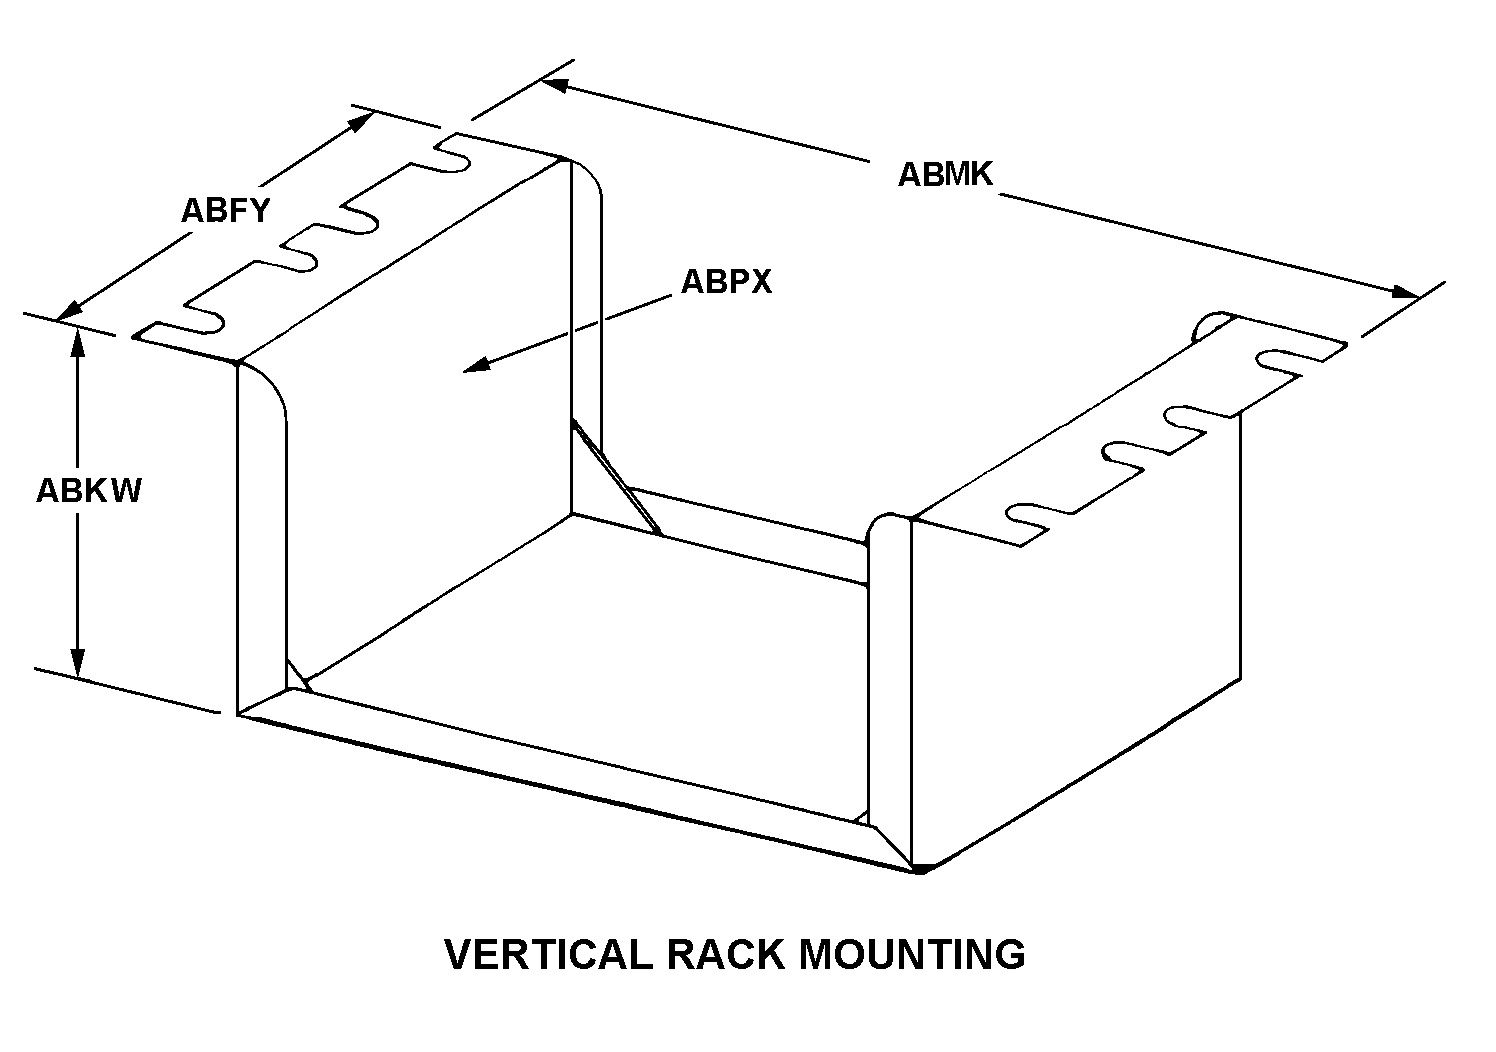 VERTICAL RACK MOUNTING style nsn 5975-01-480-9321